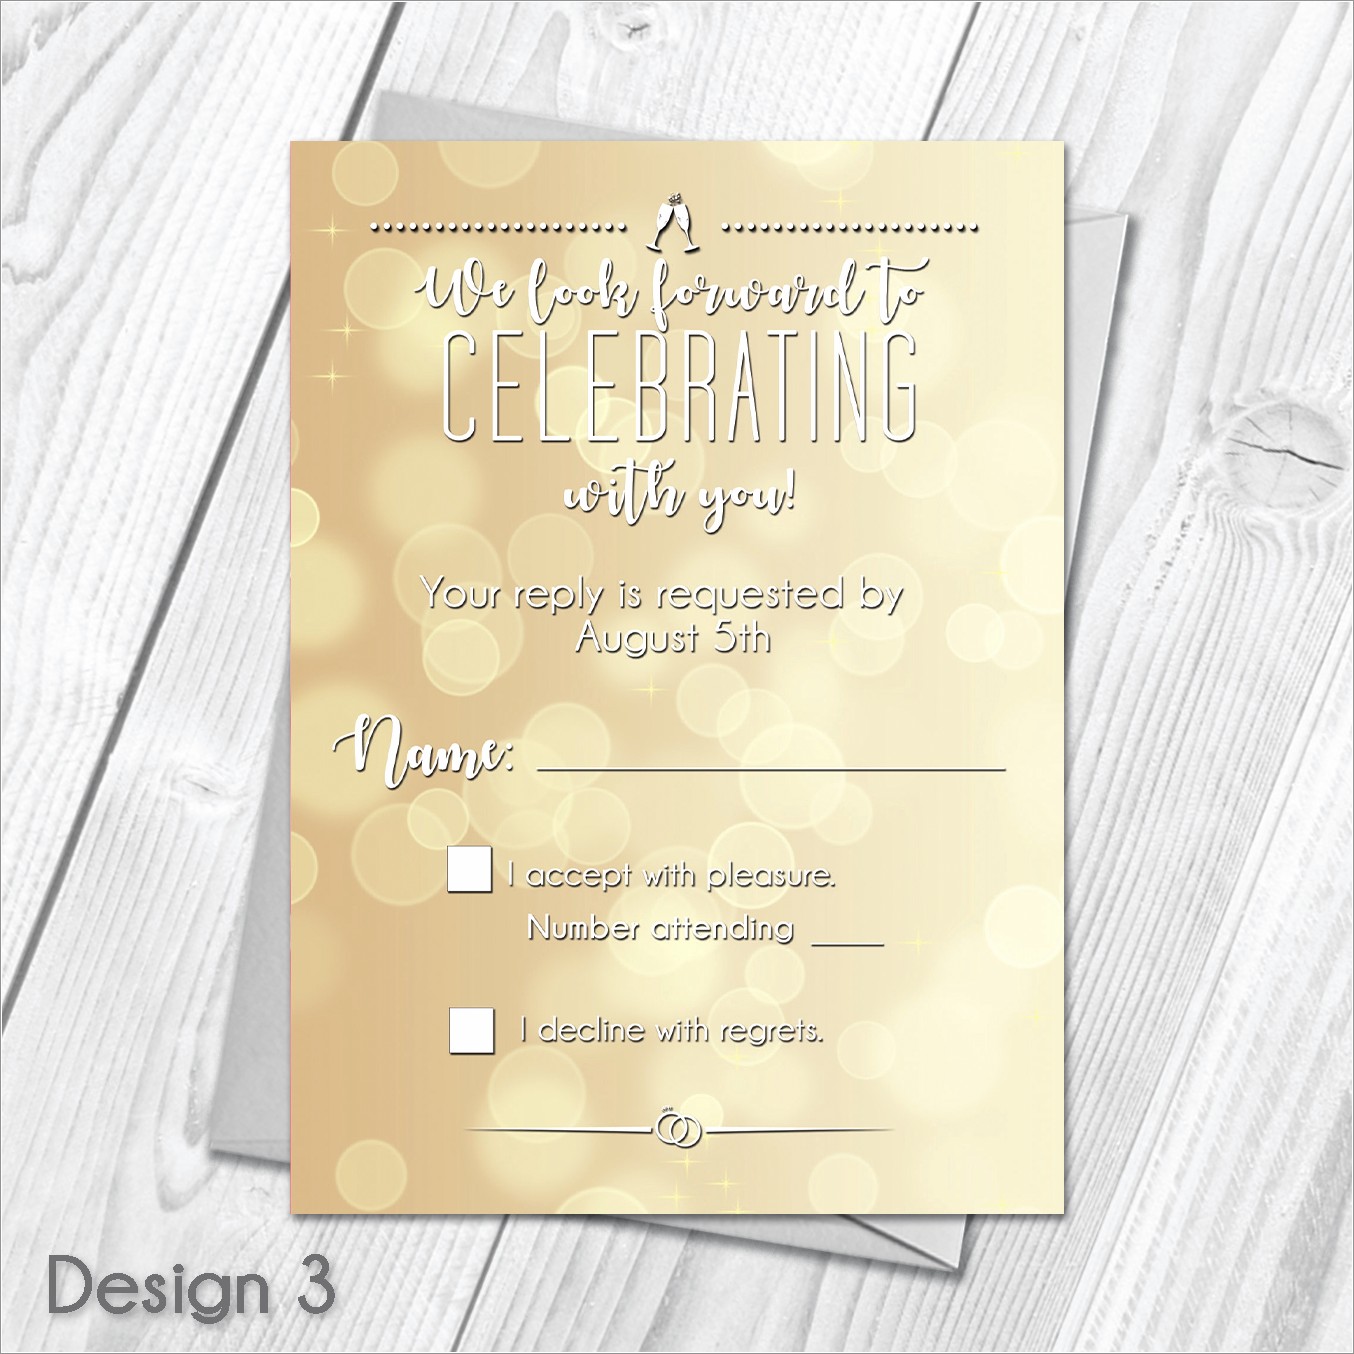 Wedding Invitations With Matching Rsvp Cards